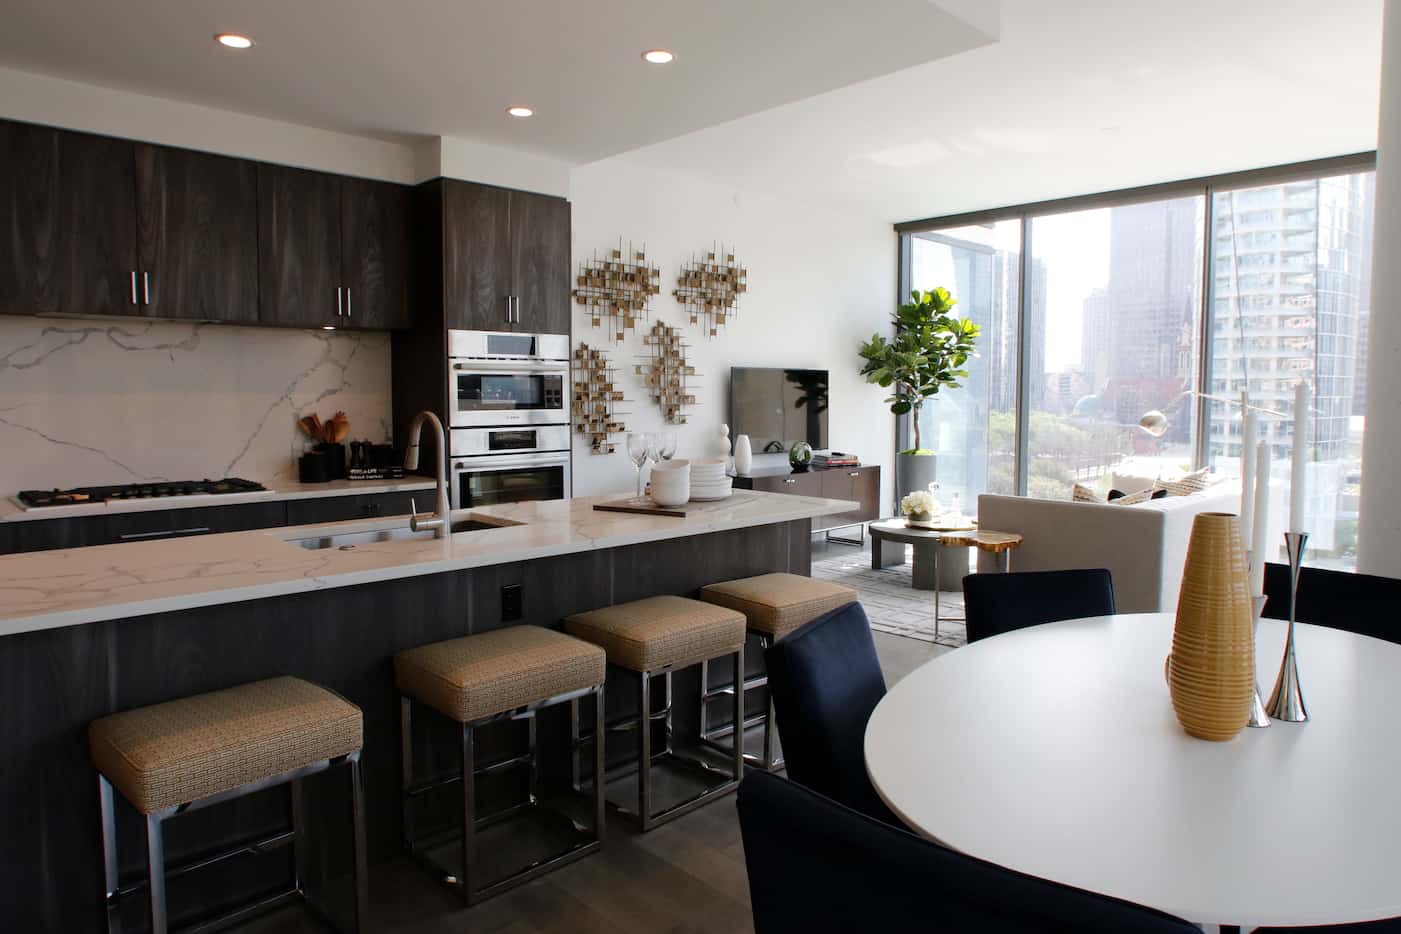 A model apartment in the new Residences at Park District high-rise overlooking Klyde Warren...